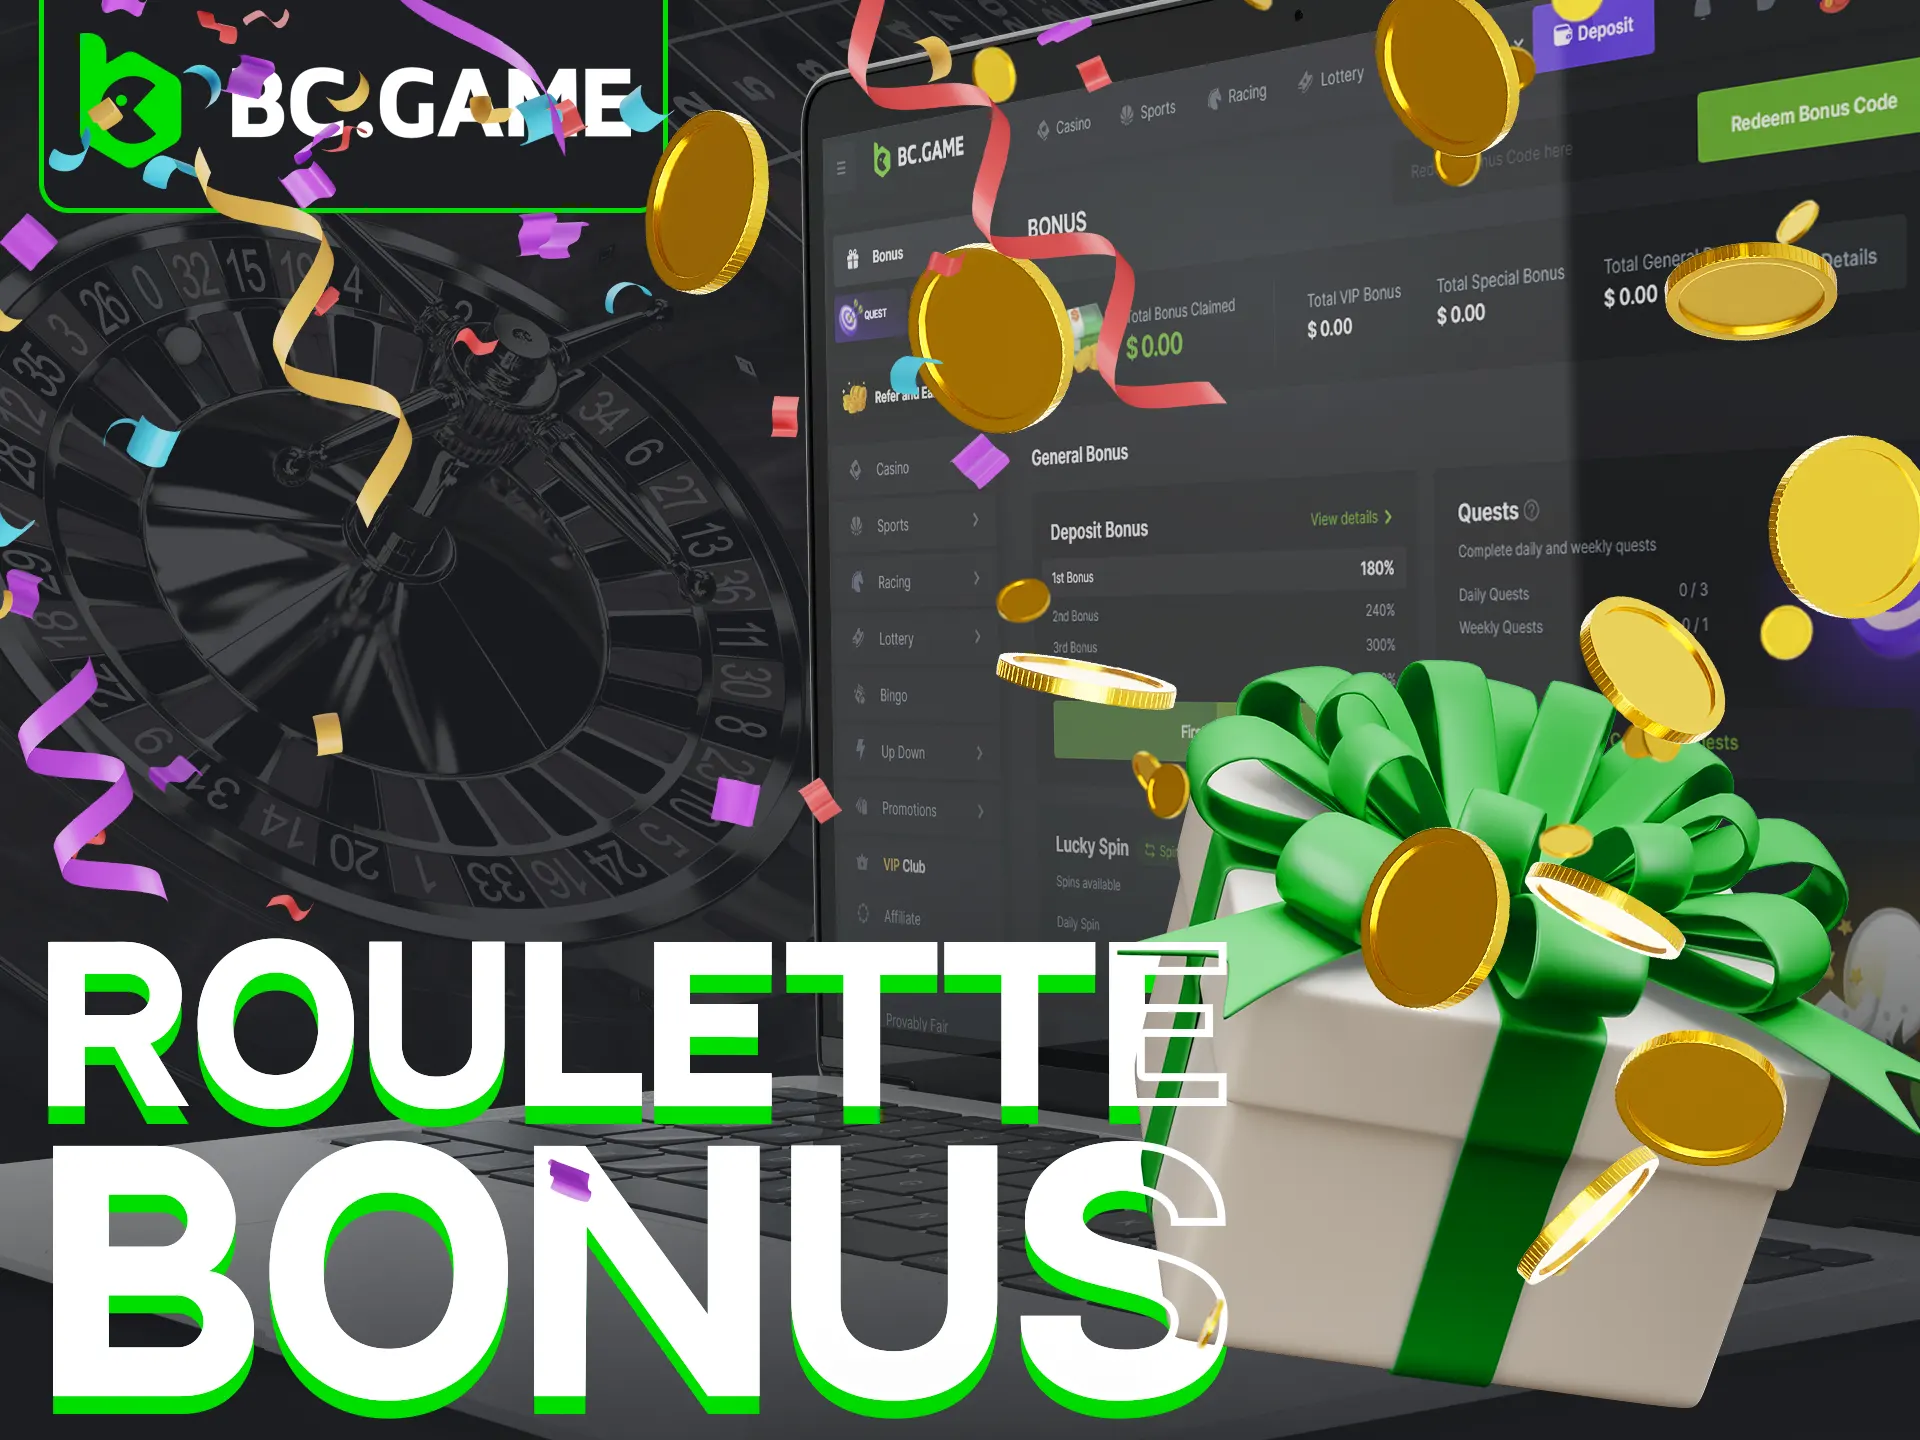 Get bonuses on roulette at BC Game.